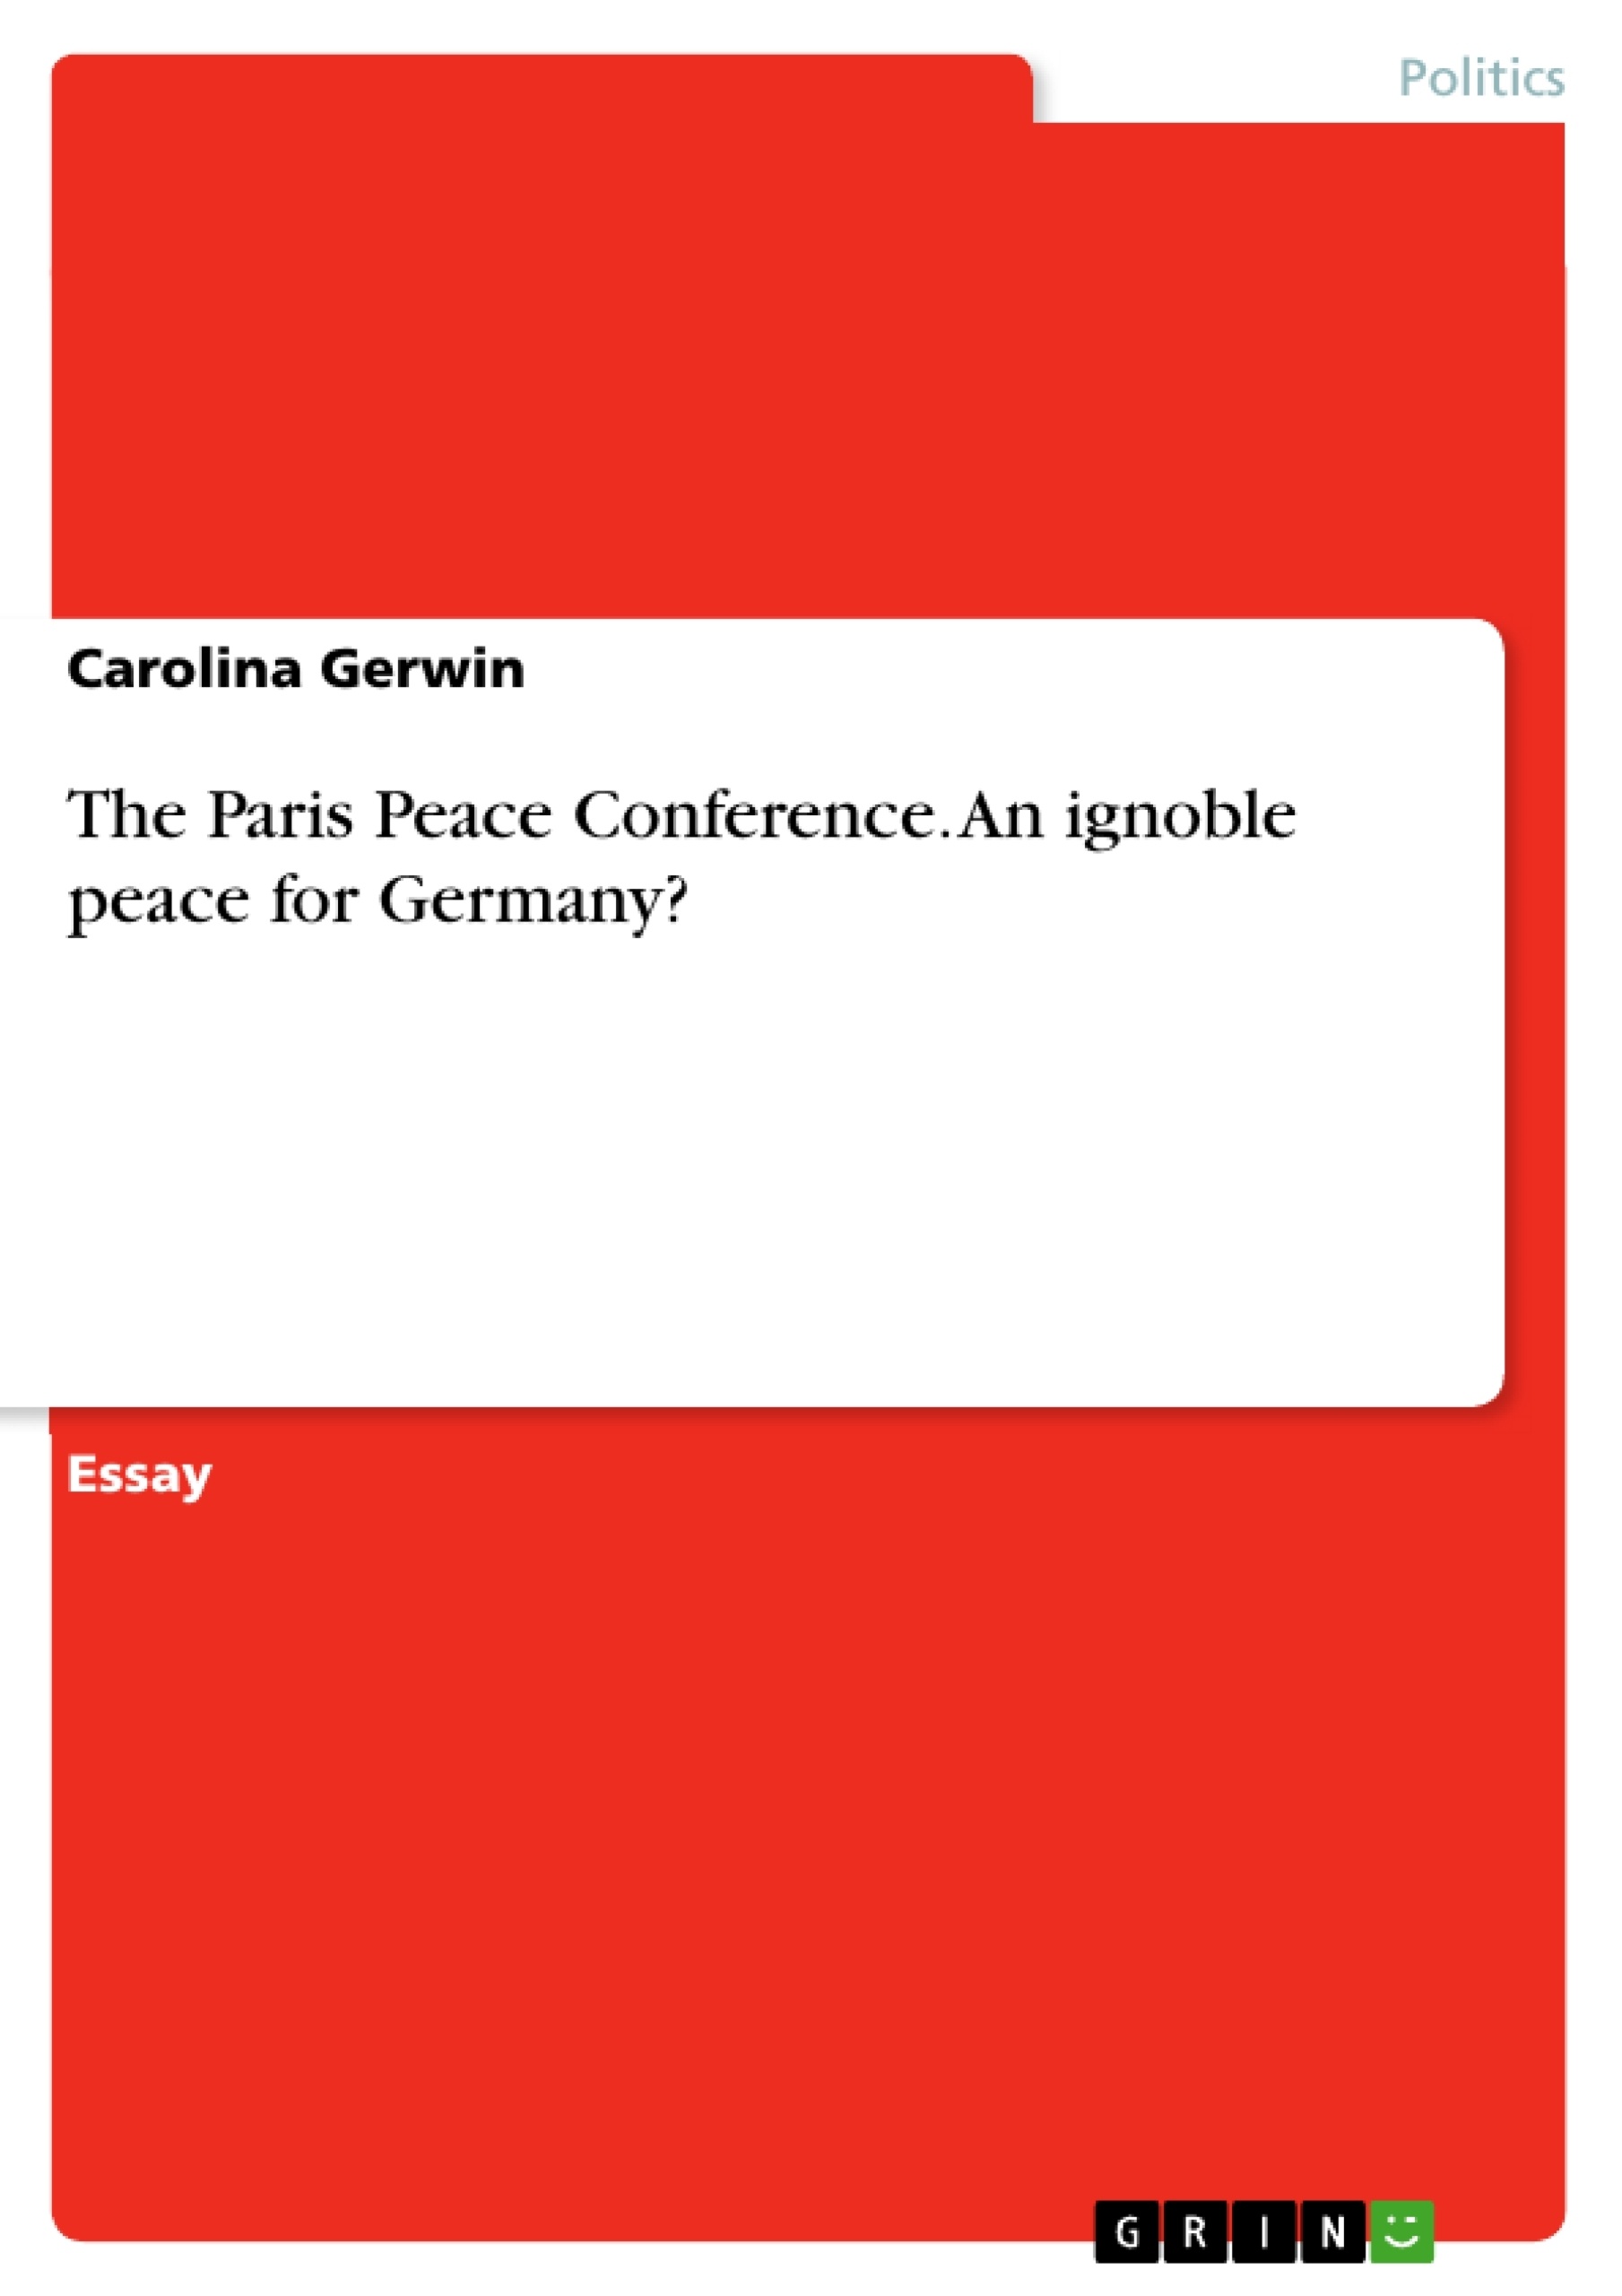 Title: The Paris Peace Conference. An ignoble peace for Germany?